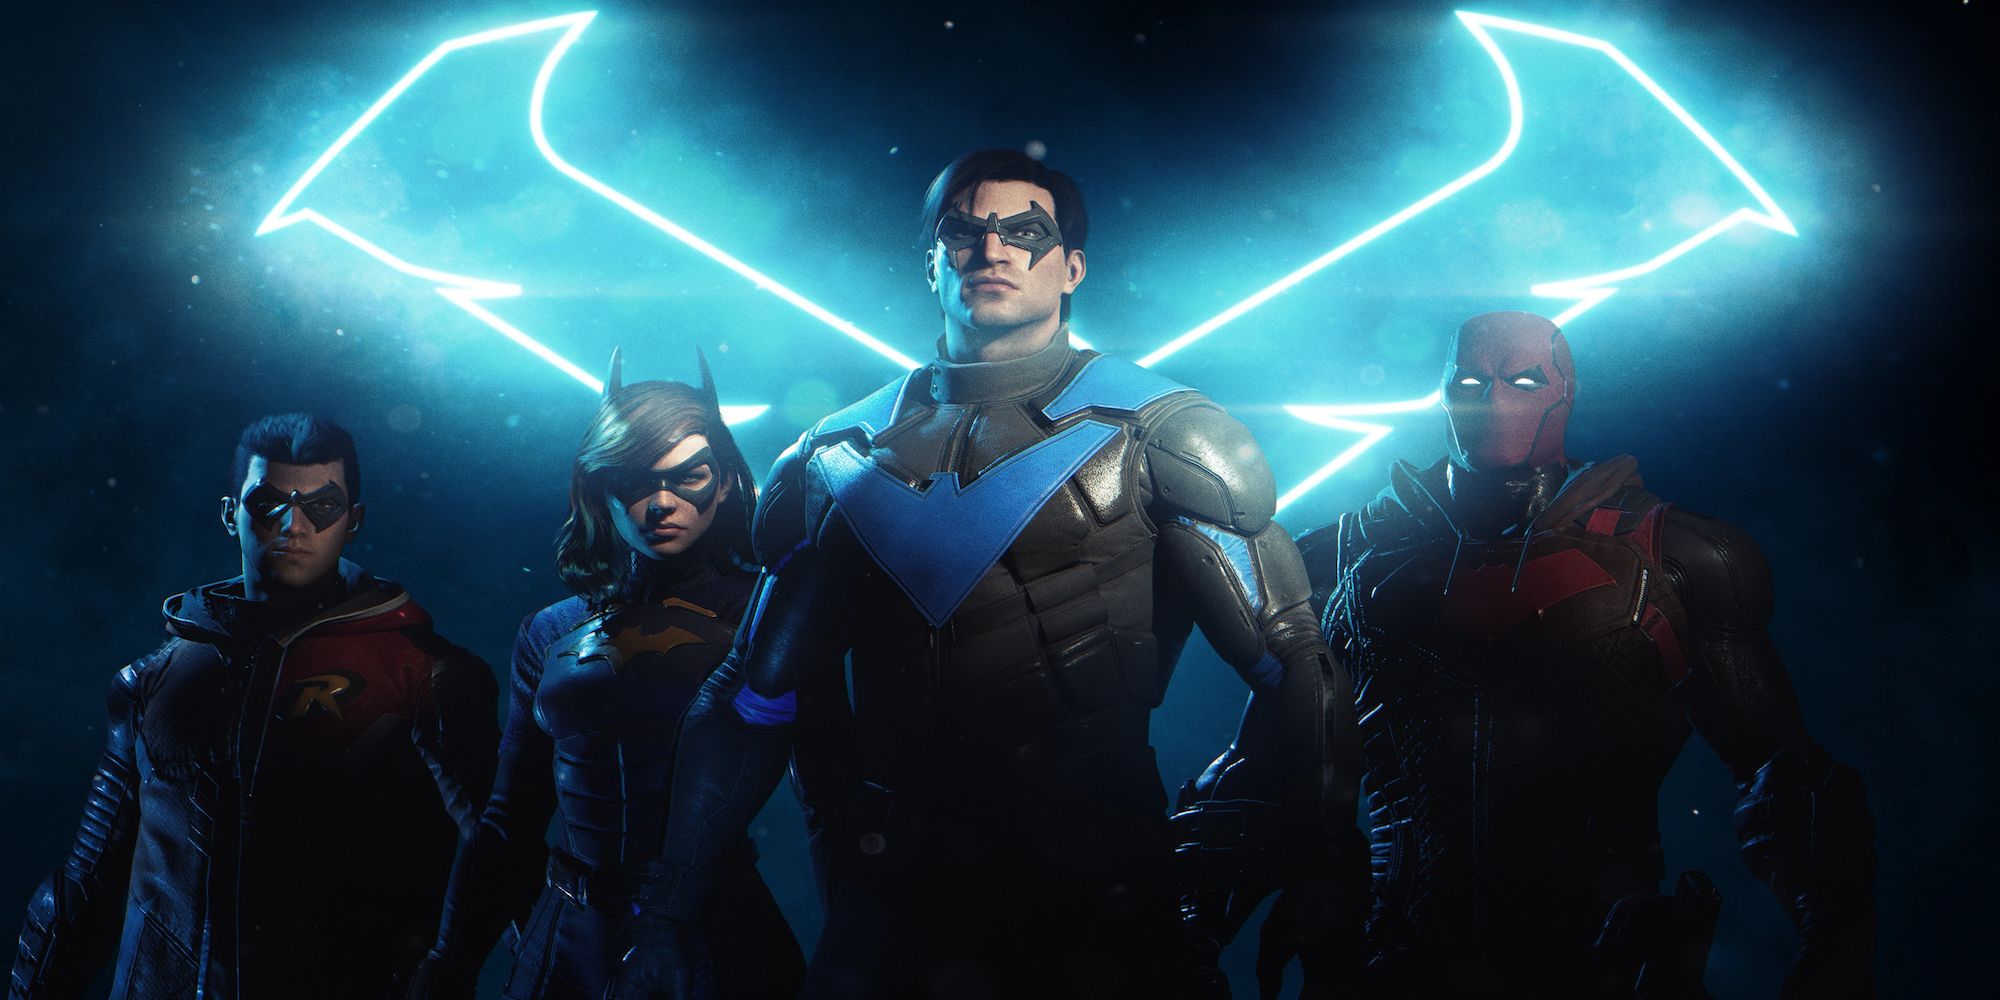 Nightwing and the Gotham Knights standing proudly against a lit up X in background